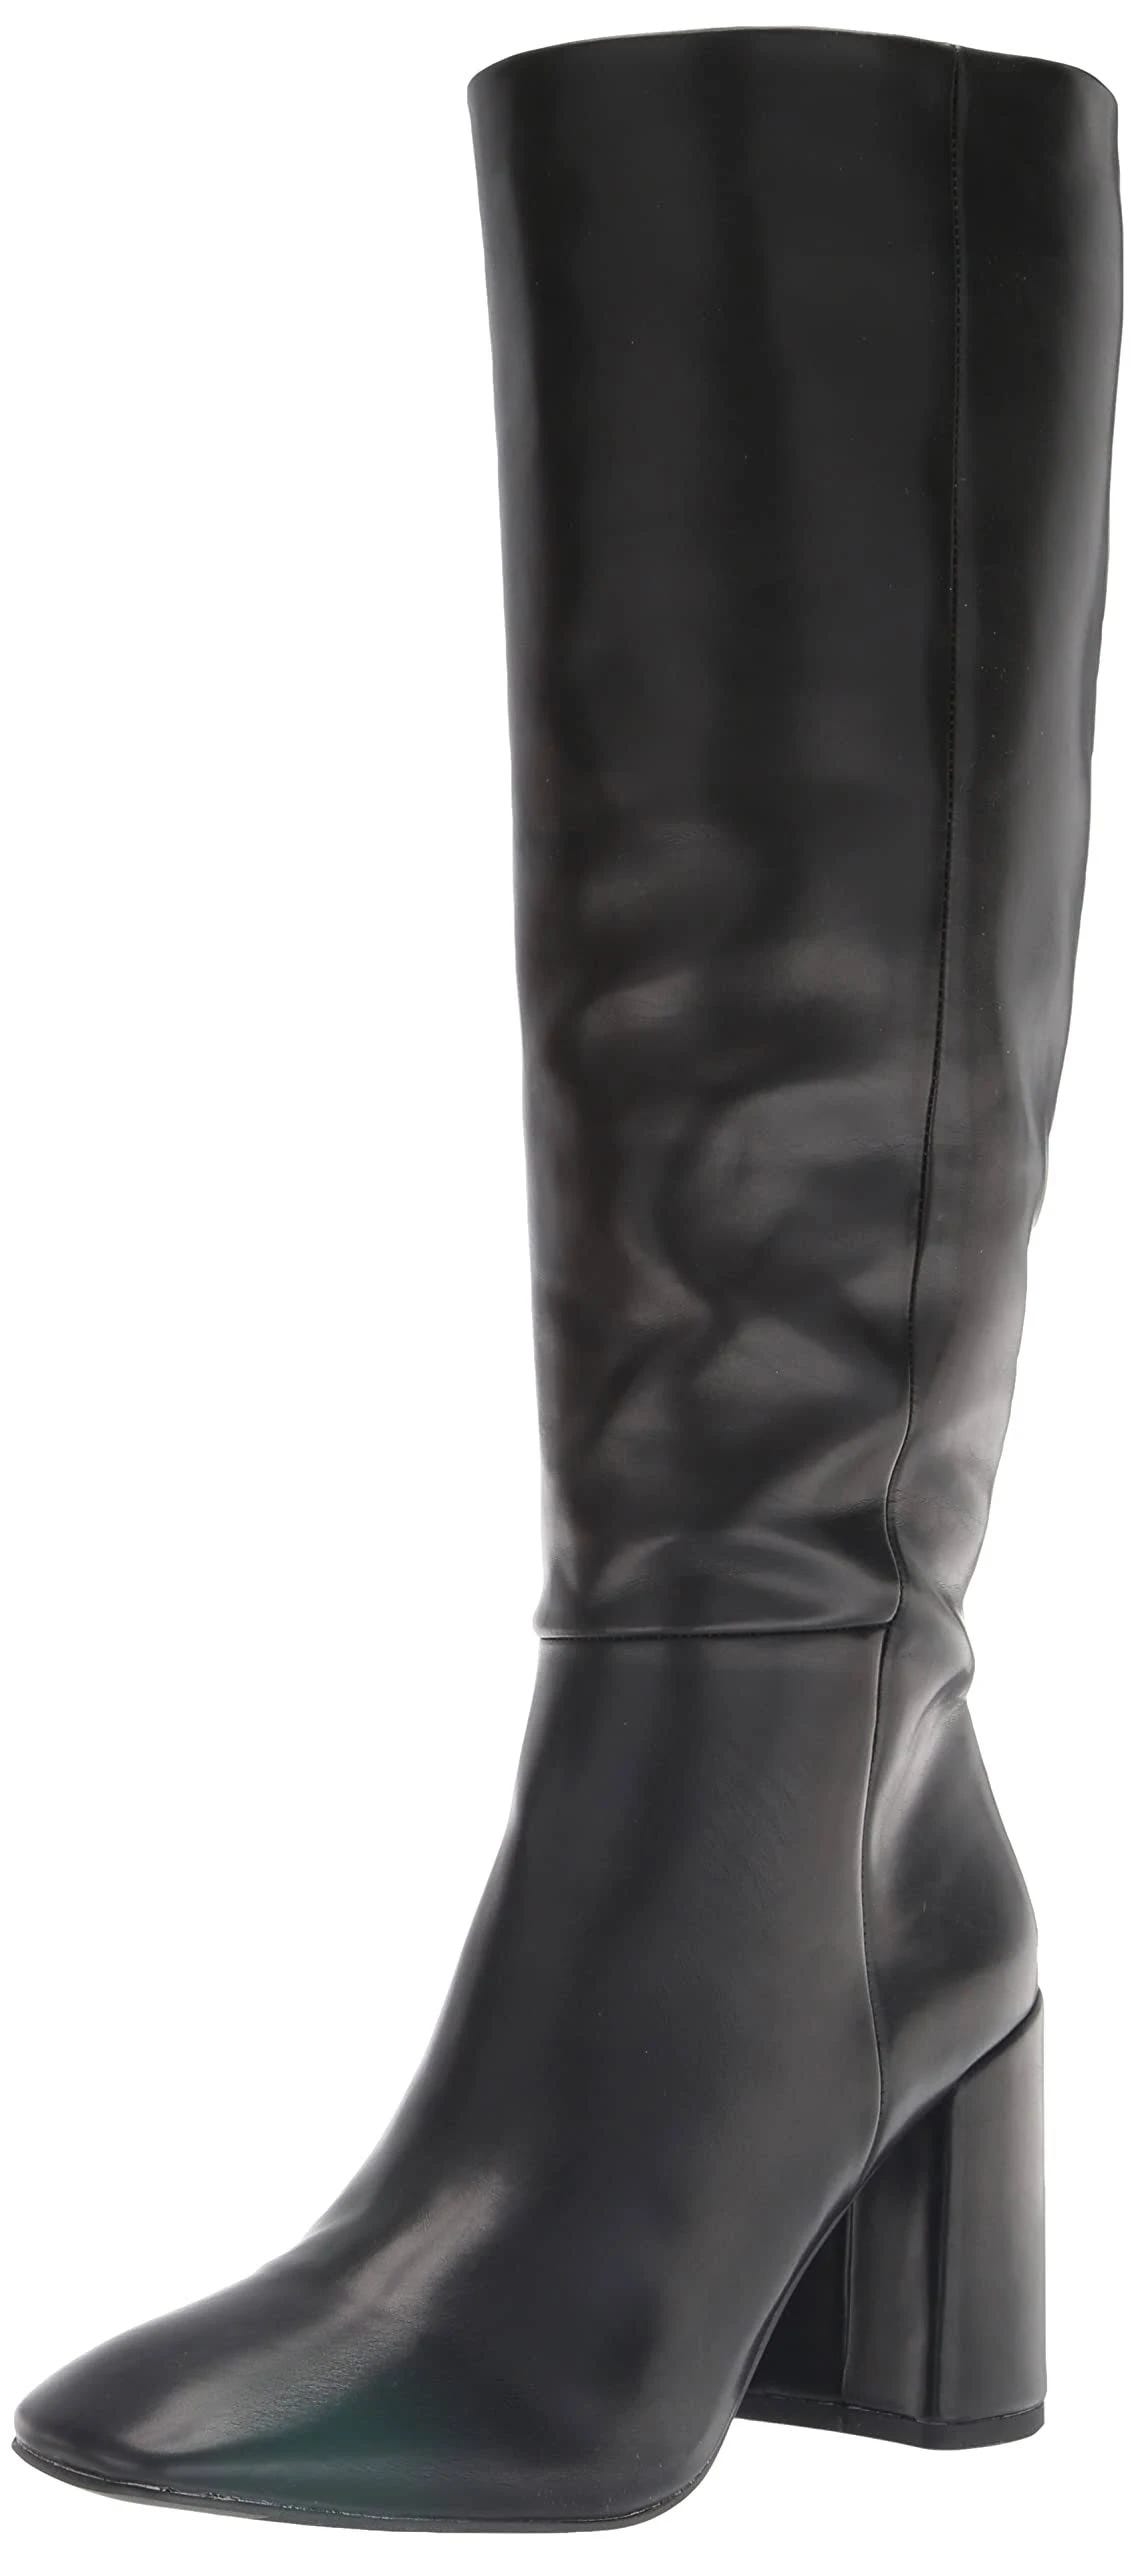 Stylish Women's Knee High Boot by Madden Girl | Image